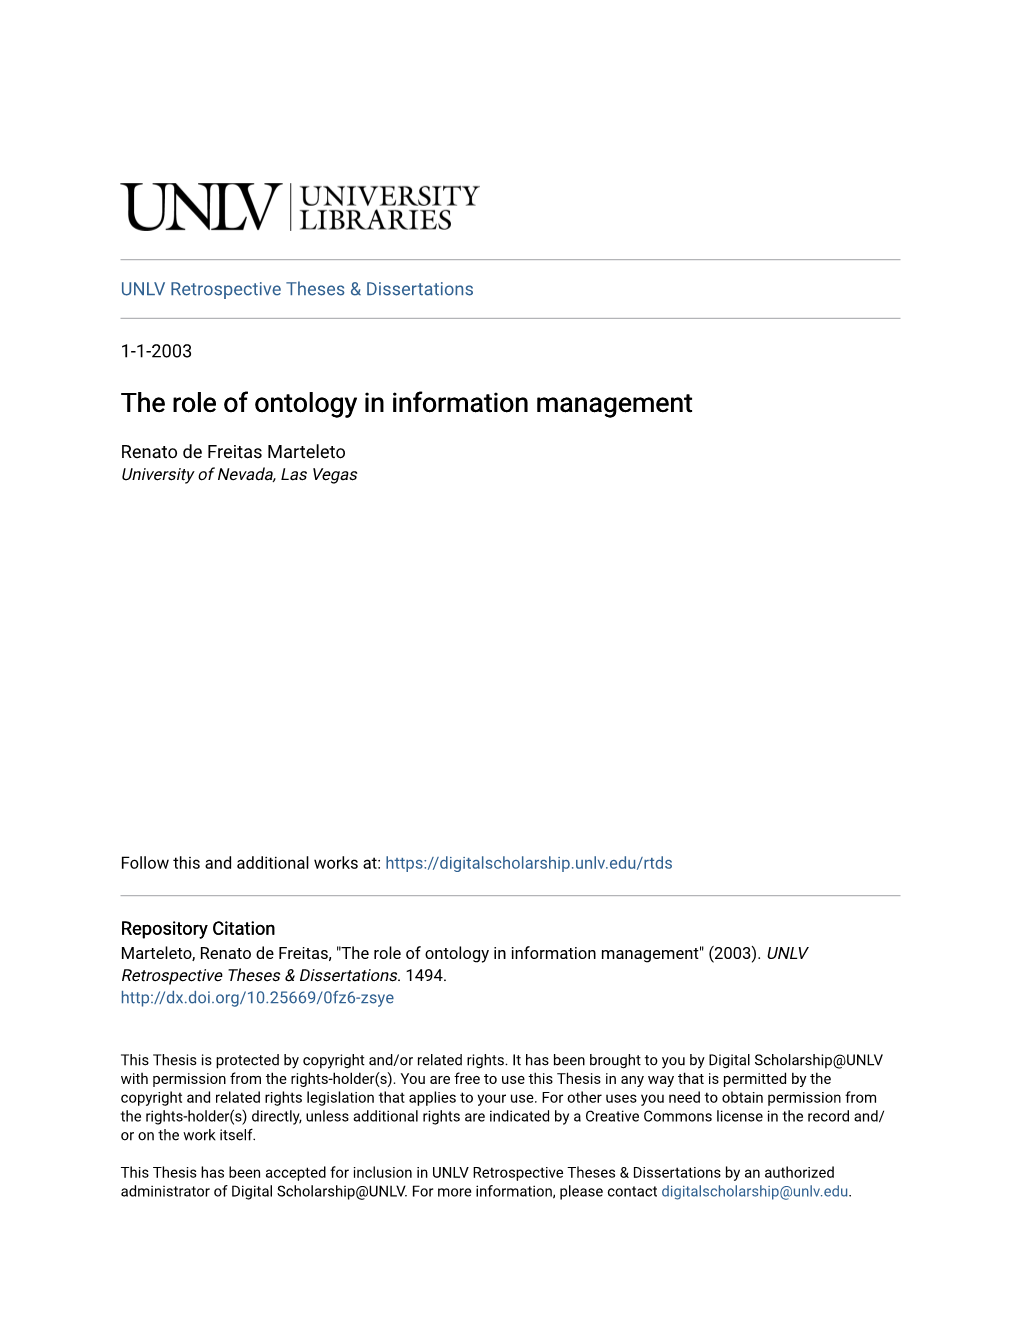 The Role of Ontology in Information Management